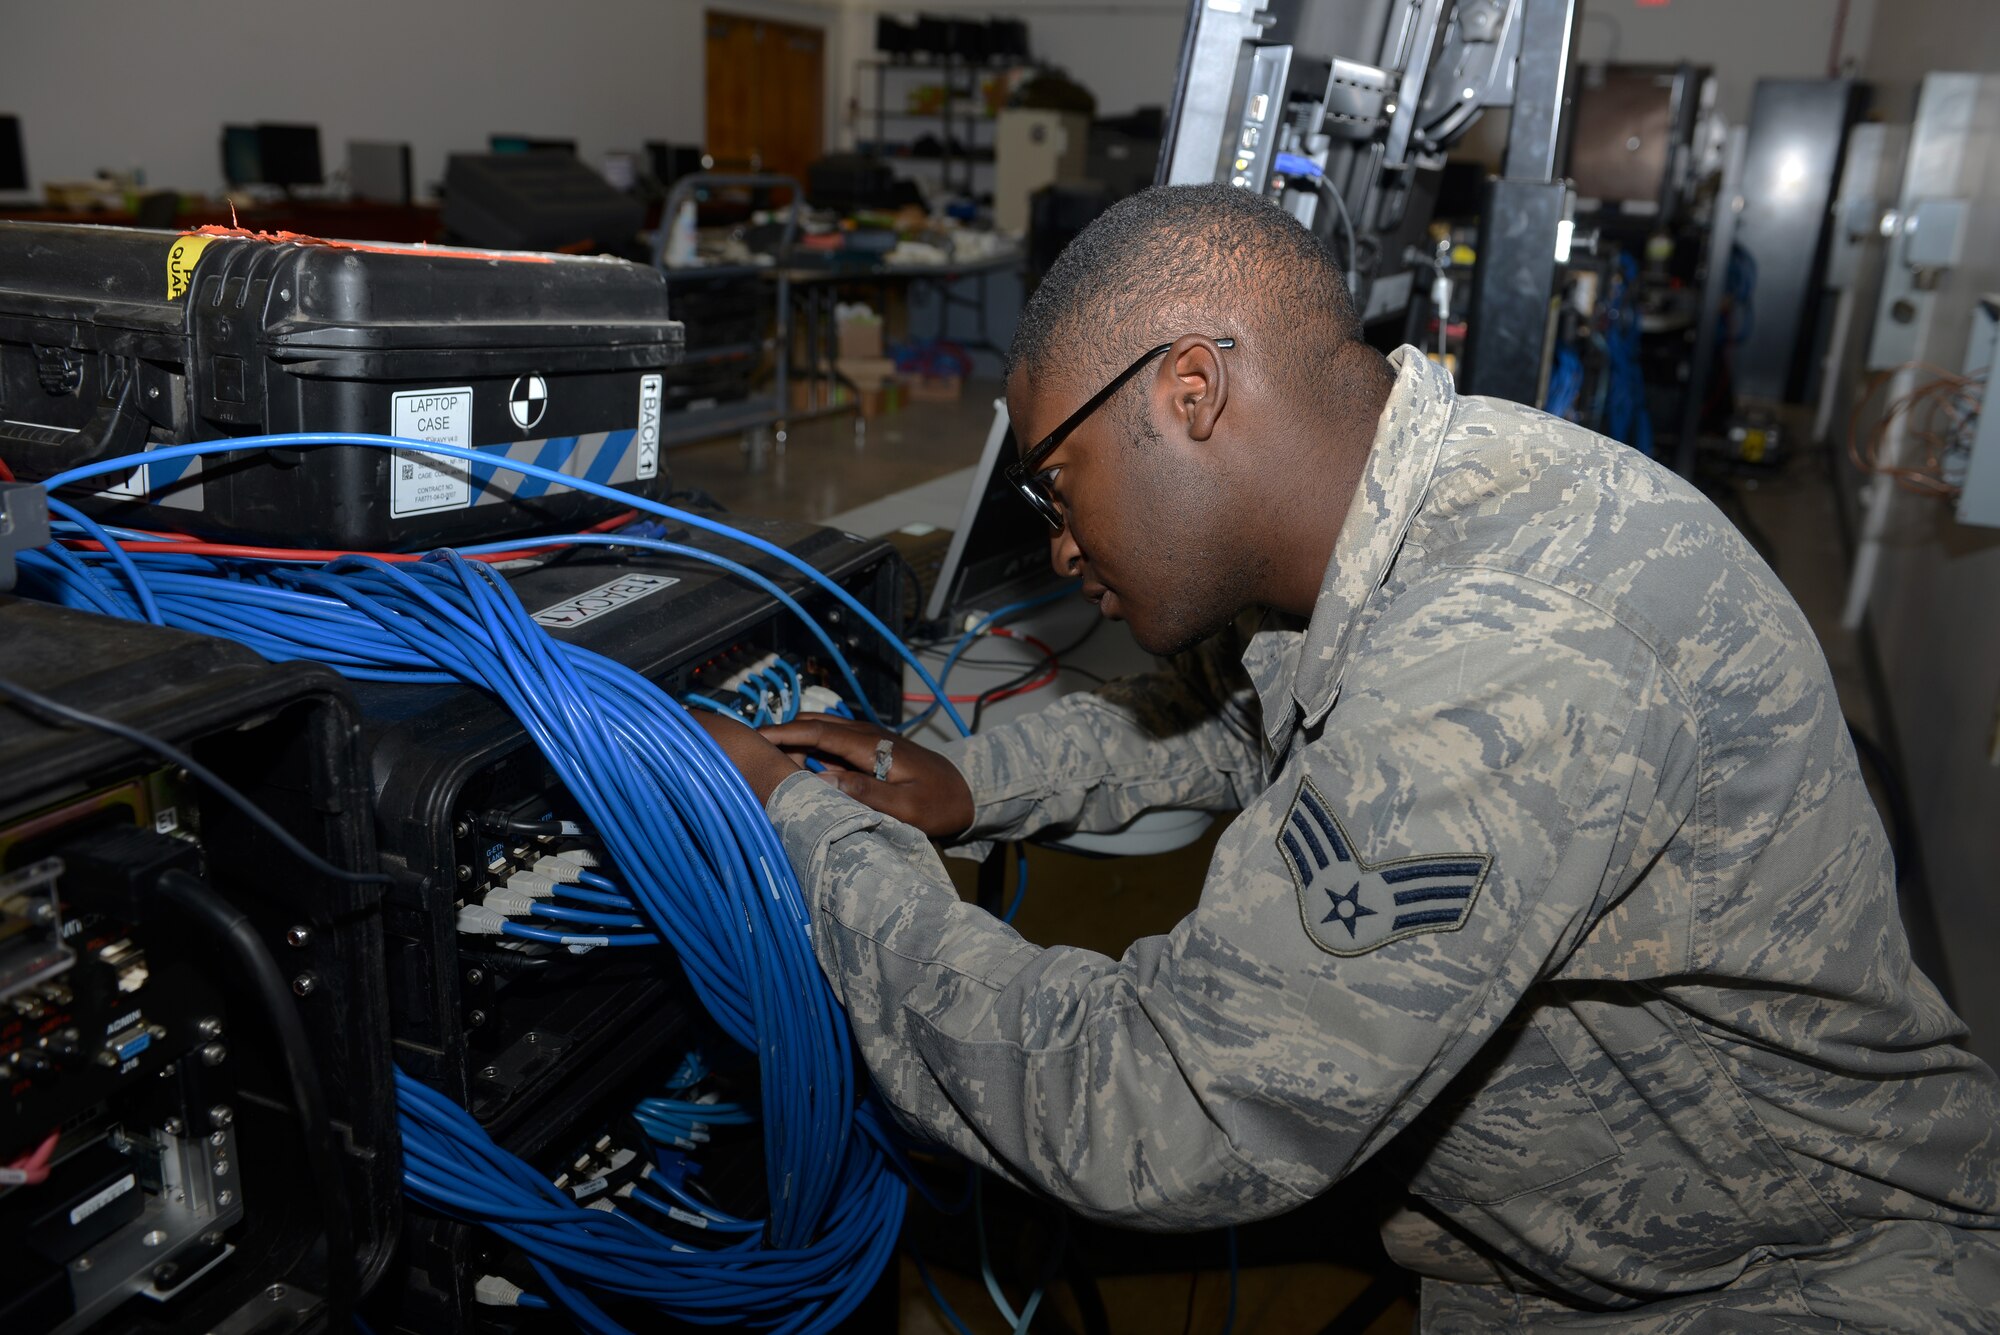 Senior Airman Shameer Goss, 644th Combat Communications Squadron network administrator, logs into a deployable network server to ensure it is in working condition May 12, 2015, at Northwest Field, Guam. The unit is tasked with providing communication for a site that can range anywhere from 50 to 3,000 members, depending on operational needs. (U.S. Air Force photo by Airman 1st Class Arielle Vasquez/Released)